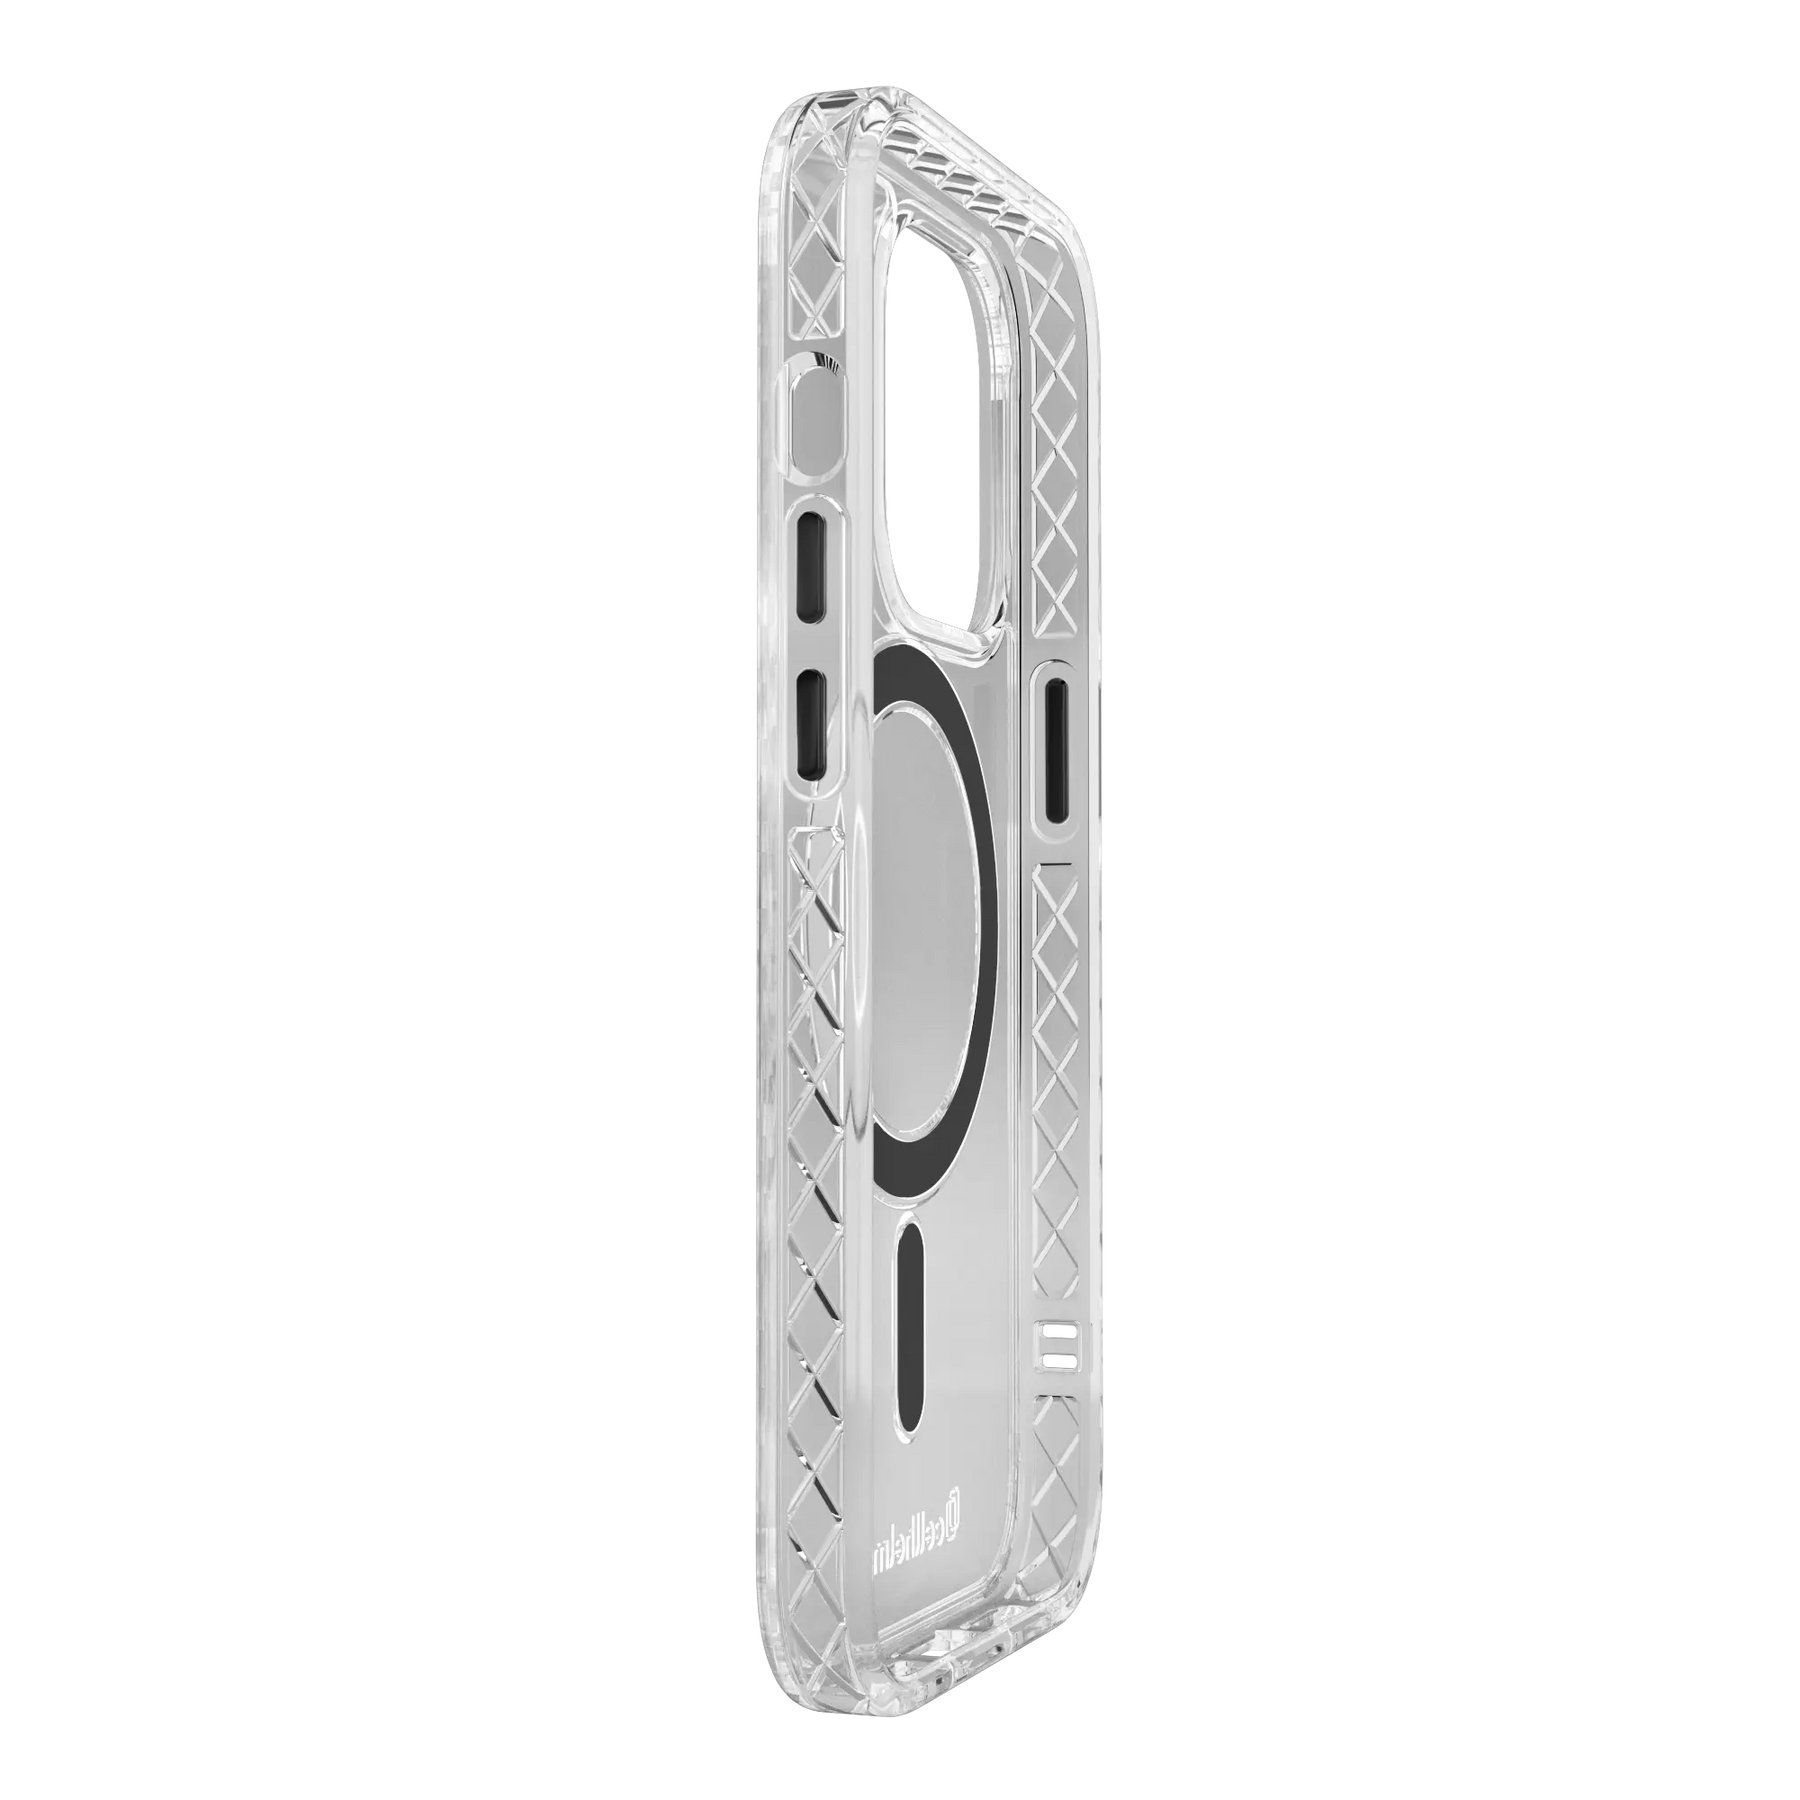 Apple - iPhone 14 Pro Case with MagSafe - Clear